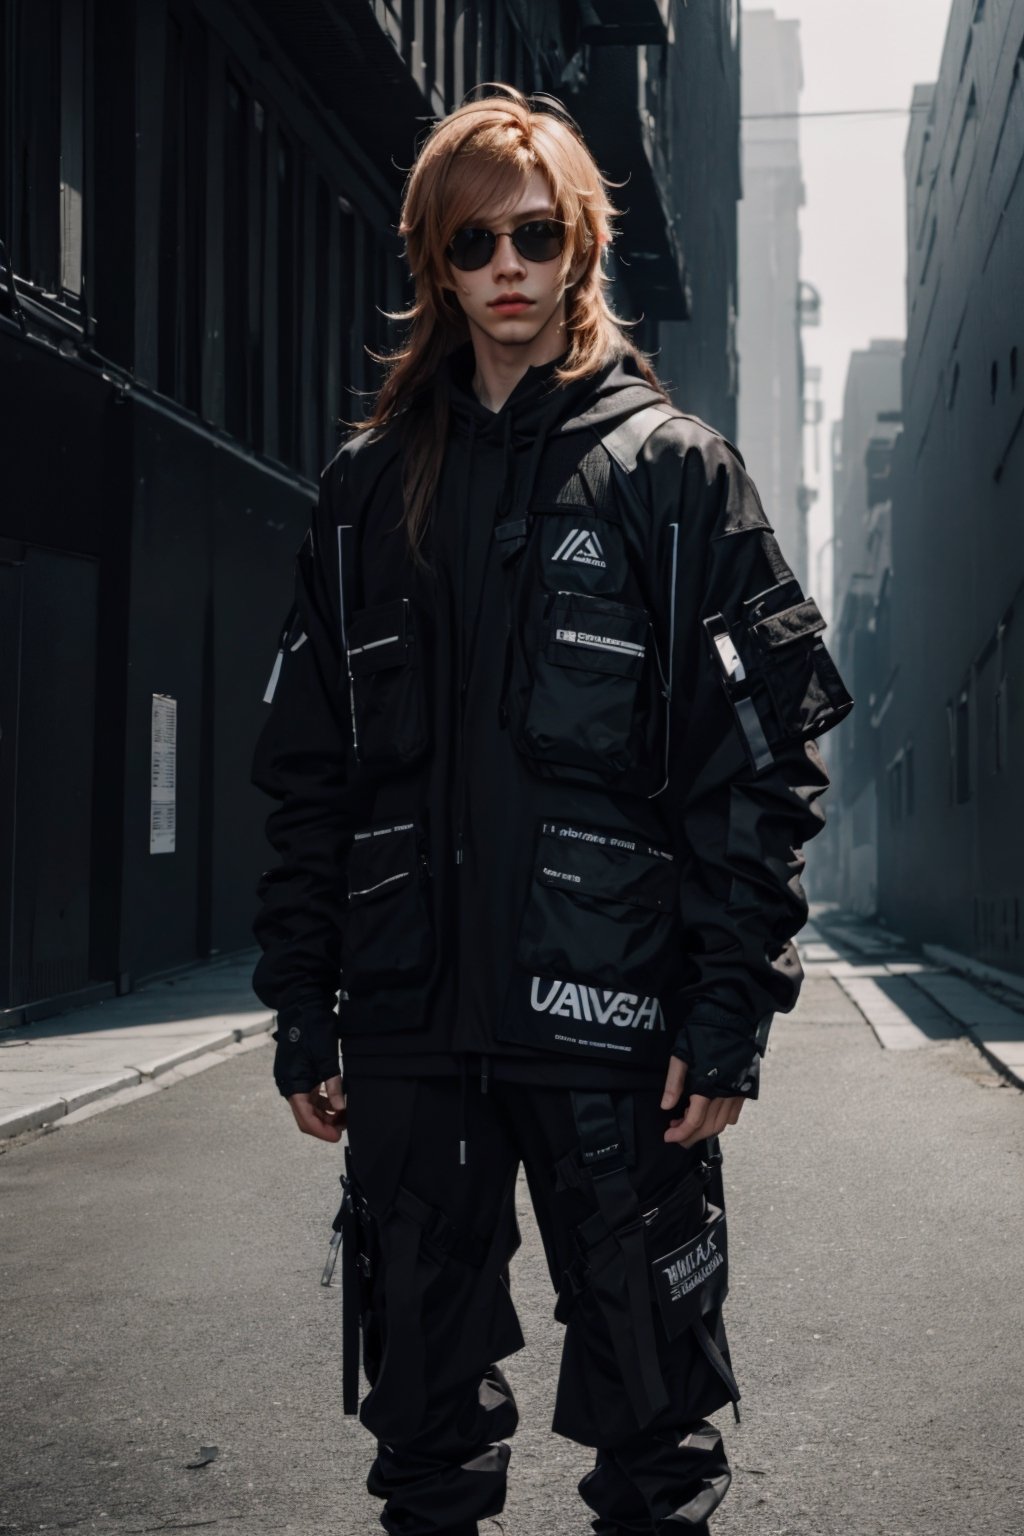 a 30 yo man, ginger long hair, wearing glasses, dark theme, black_clothing, hold in hand a cigarette, soothing tones, muted colors, high contrast, (natural skin texture, hyperrealism, soft light, sharp), blue background, simple background, shine, (((urban techwear))), techwear:1.4,j3fri,prompto argentum 